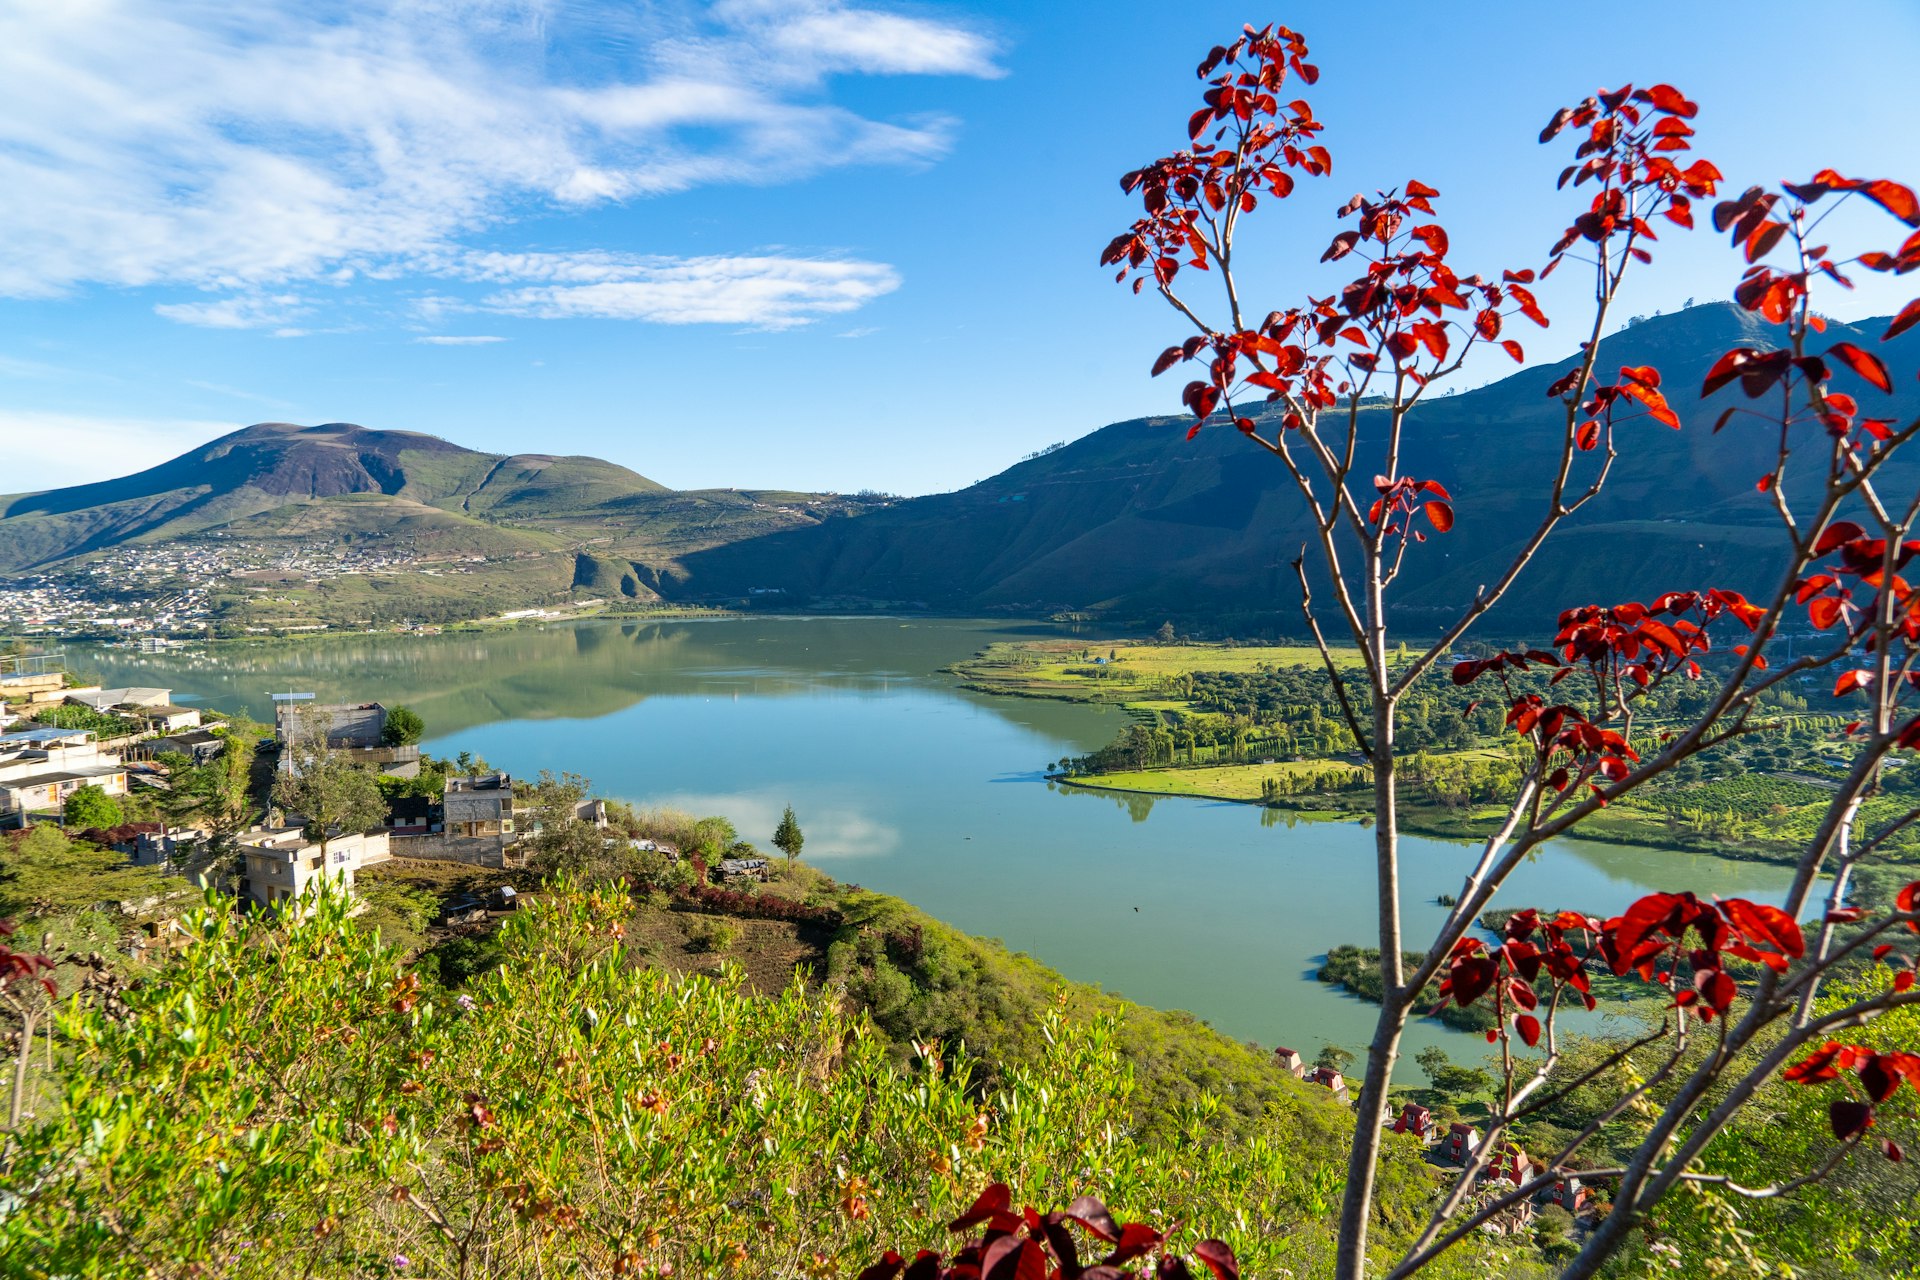 A scenic view over a lake with a few small buildings tucked into the surrounding hillsides